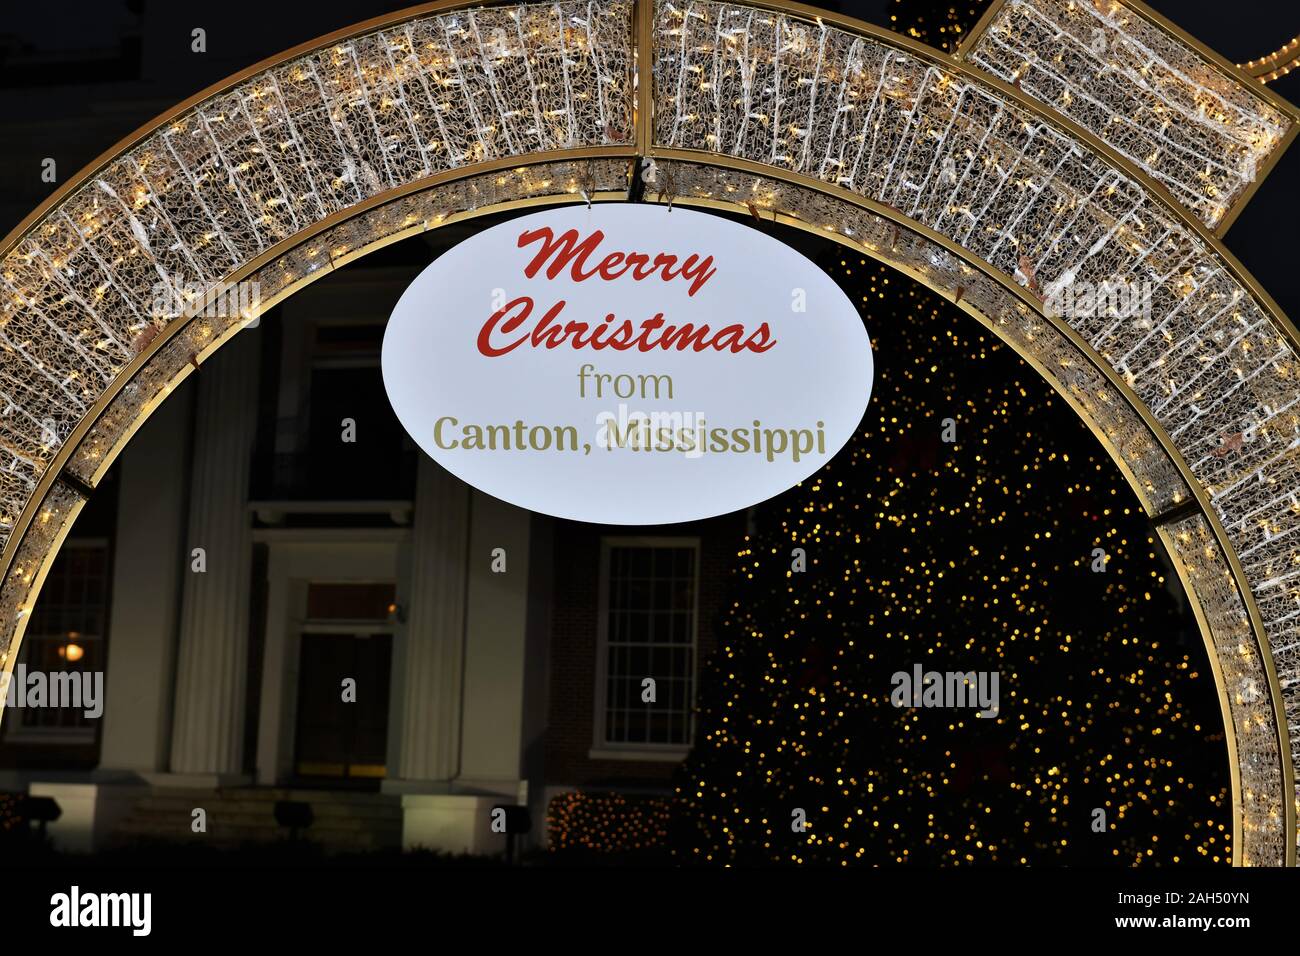 Merry Christmas from Canton, Mississippi. Stock Photo